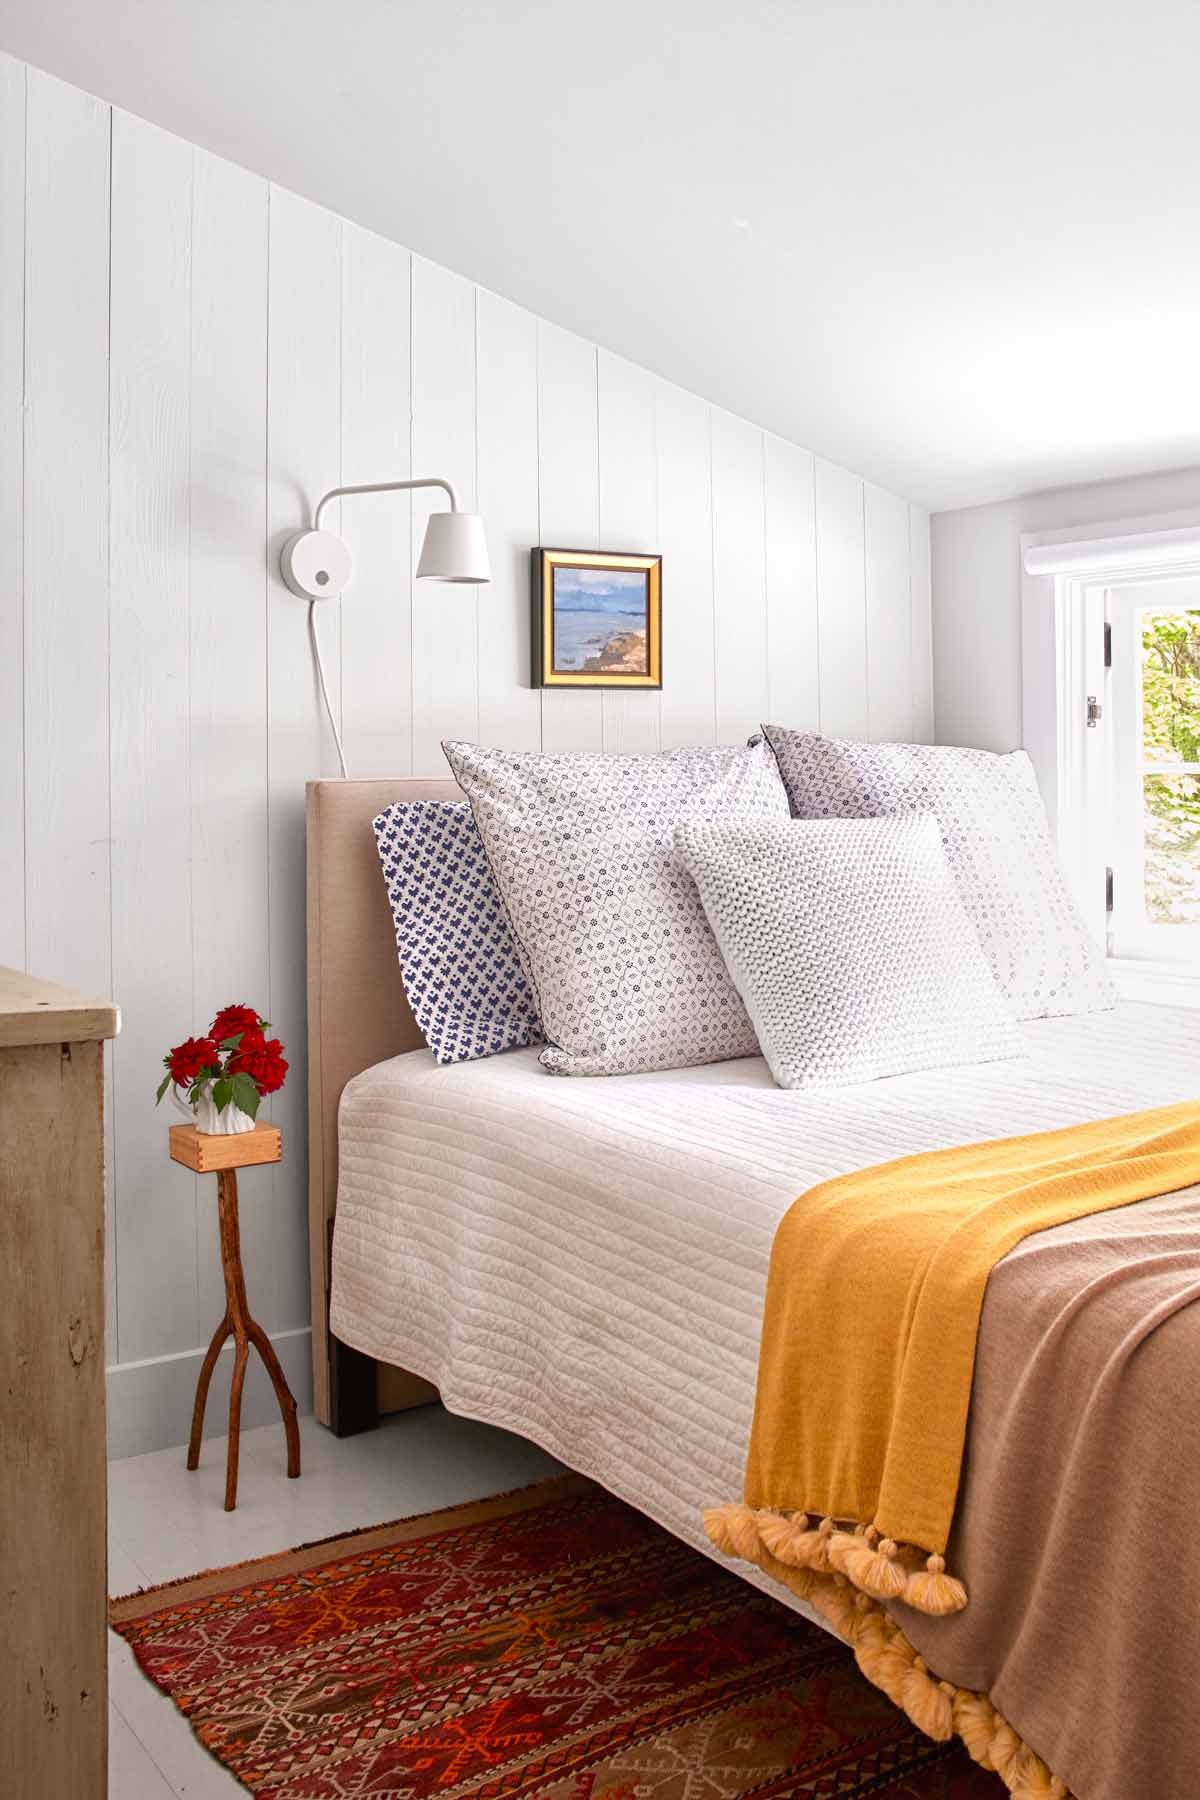 Small Guest Bedroom Ideas
 30 Guest Bedroom Decor Ideas for Guest Rooms